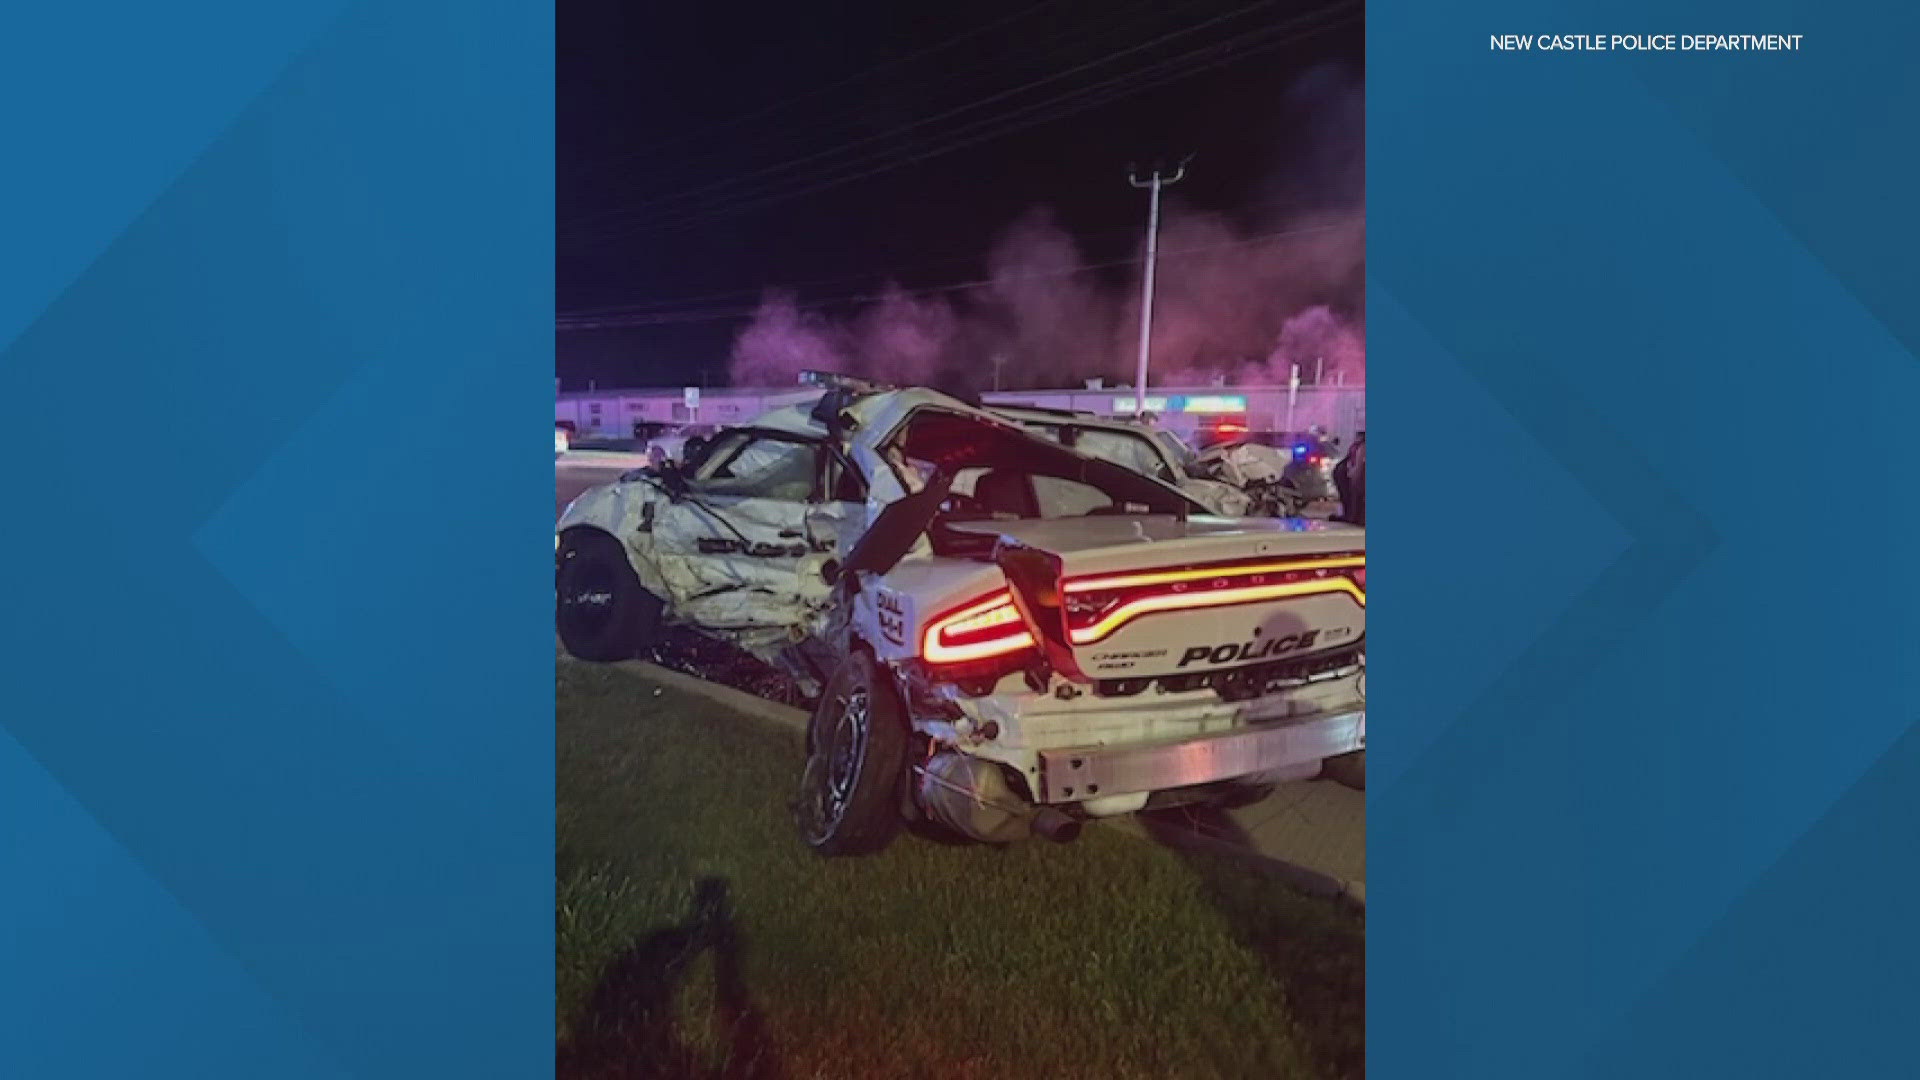 Police say the driver hit an unoccupied police car near State Road 3 and State Road 38 in New Castle. The driver was taken to the hospital with minor injuries.